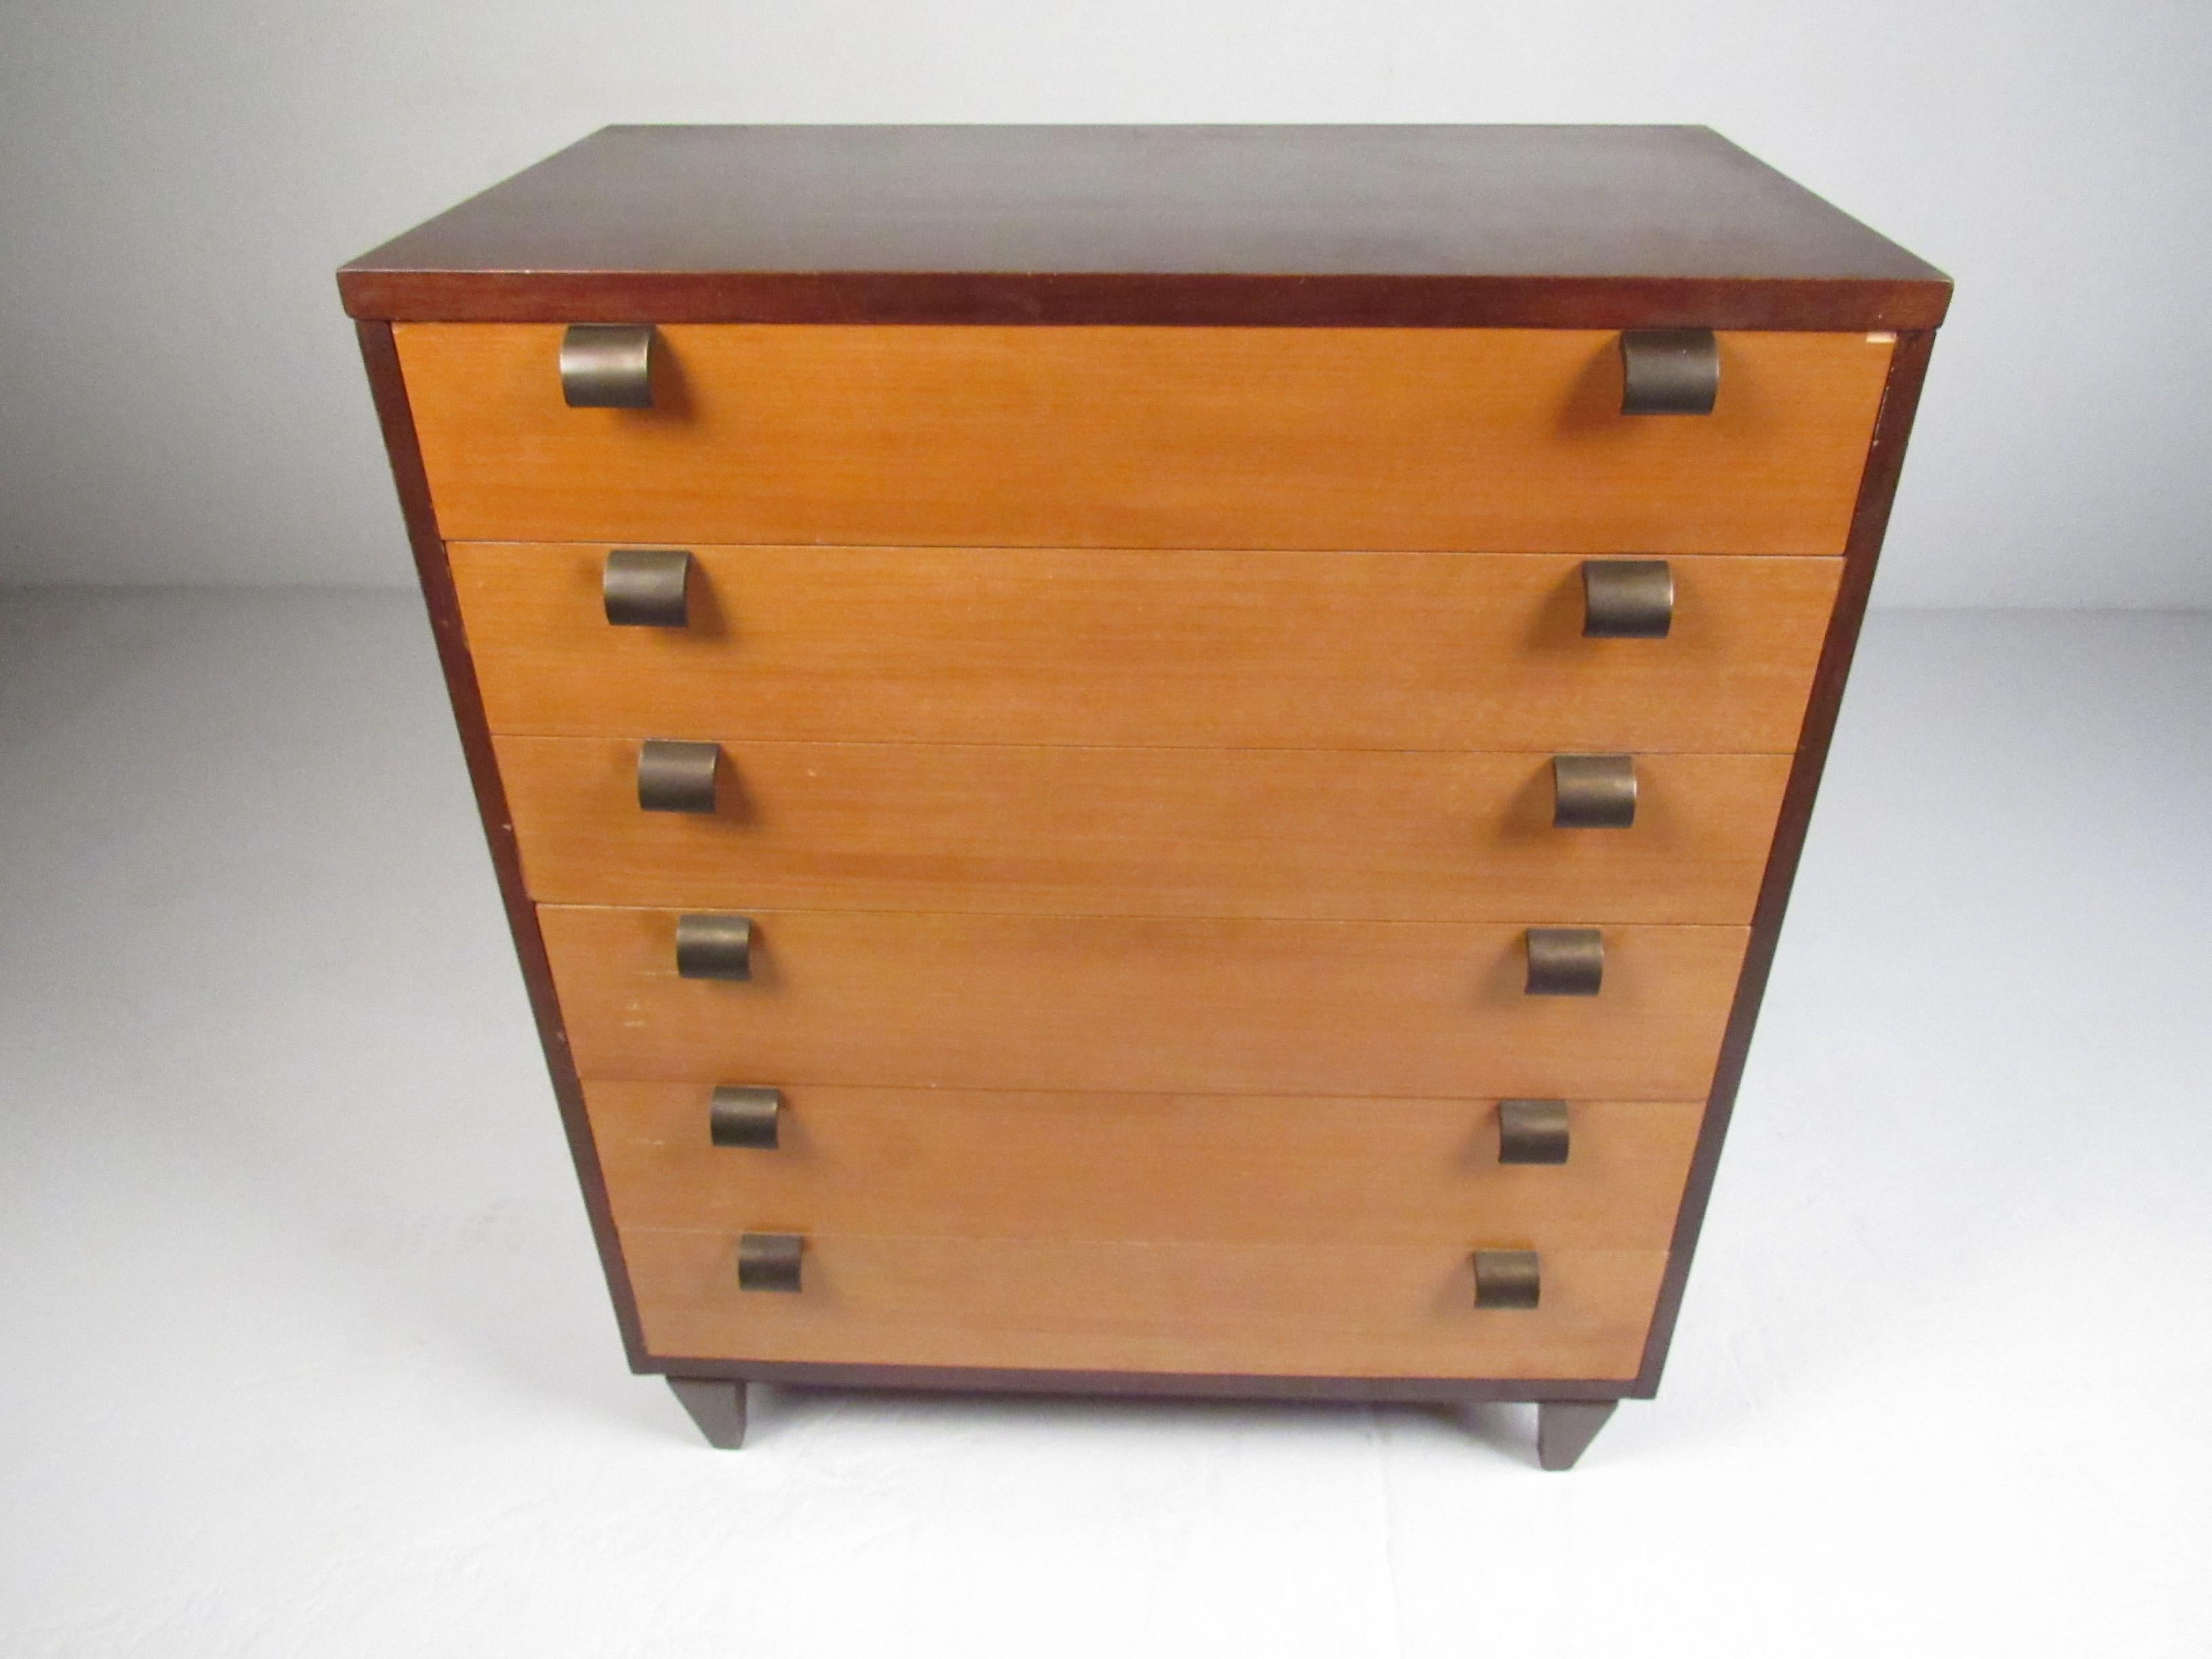 A stunning pair of Mid-Century Modern dressers with unusual curved brass pulls and tapered legs. A two-tone design that offers plenty of room for storage within its many drawers. Please confirm item location (NY or NJ).

Measures: Highboy: 36.25 W